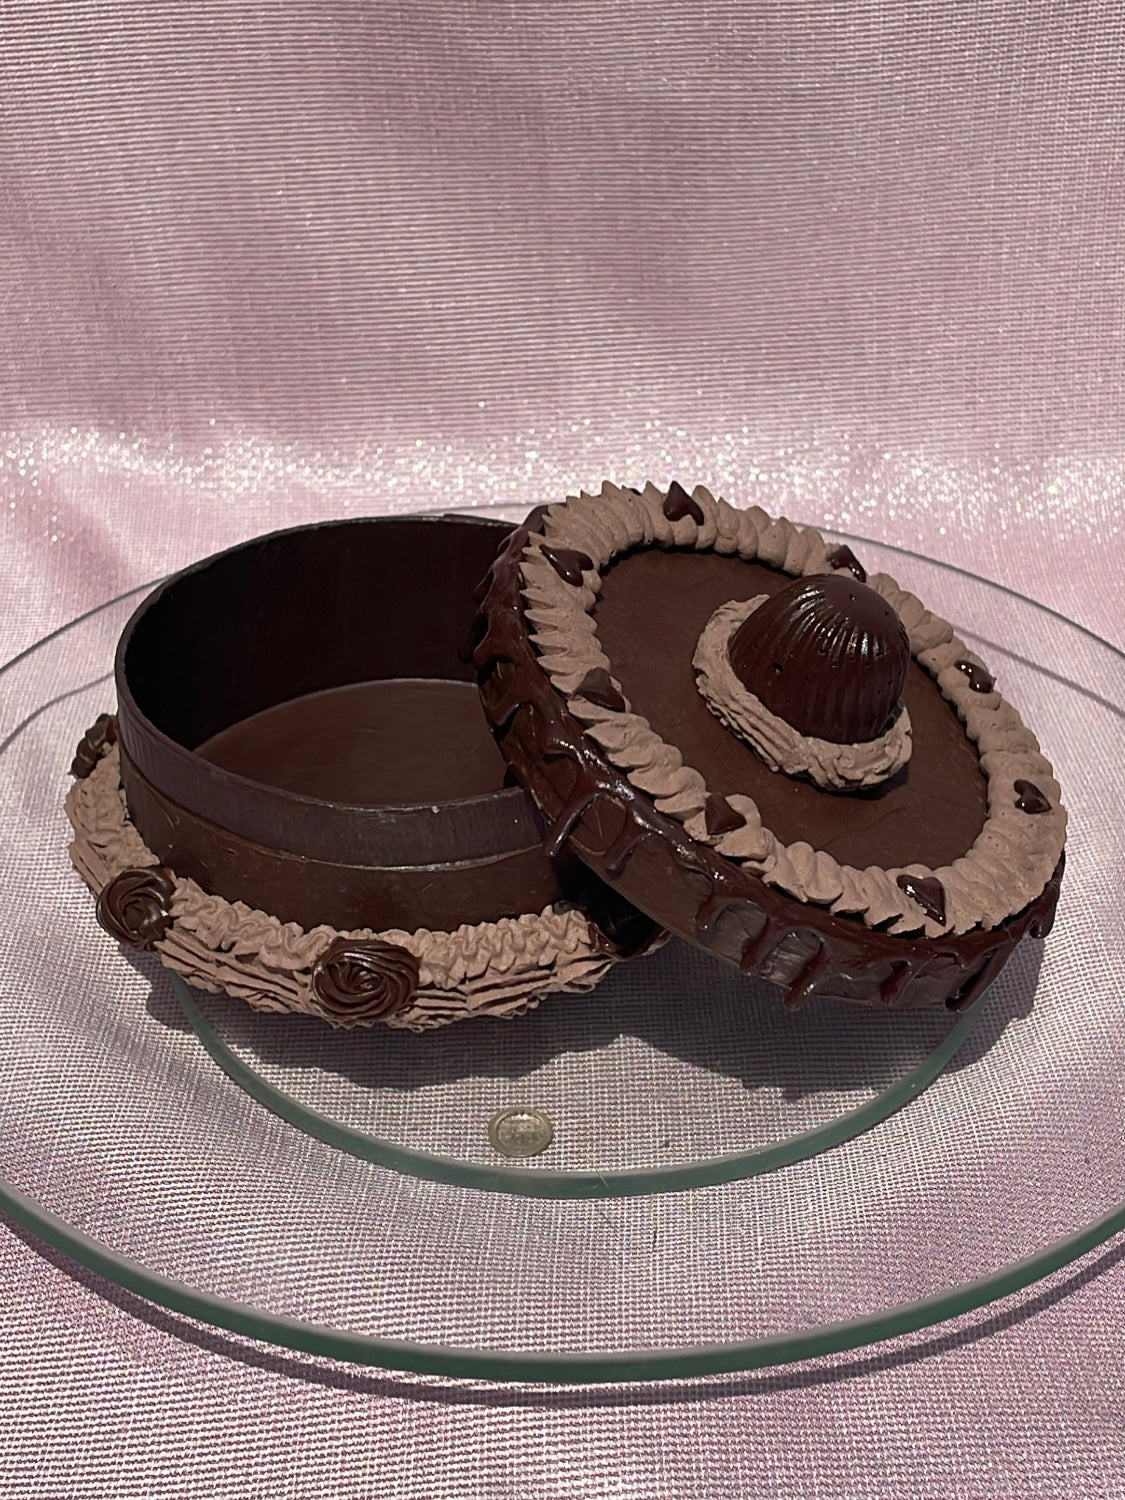 an opened round box decorated to look like a chocolate cake